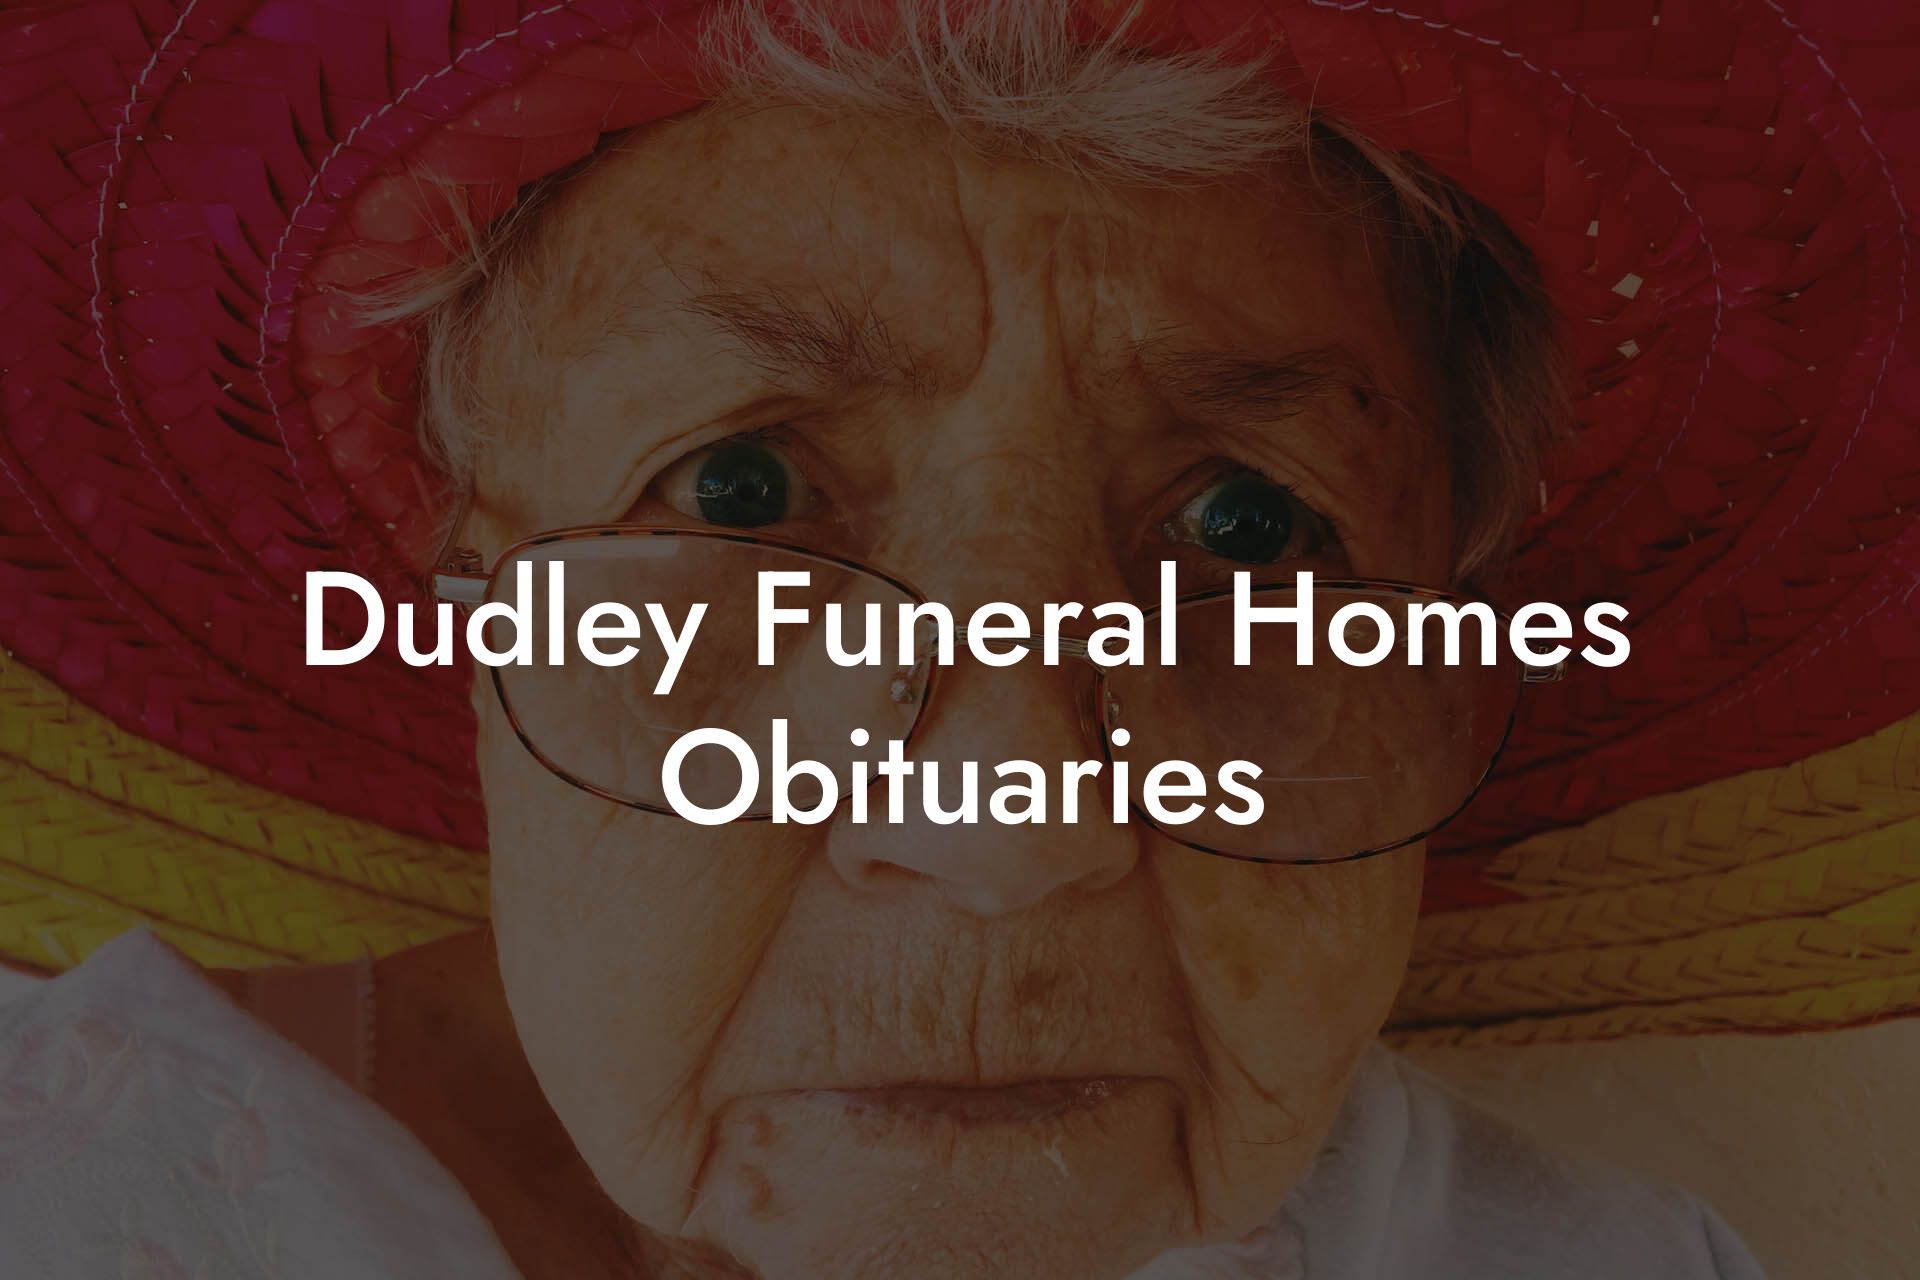 Dudley Funeral Homes Obituaries